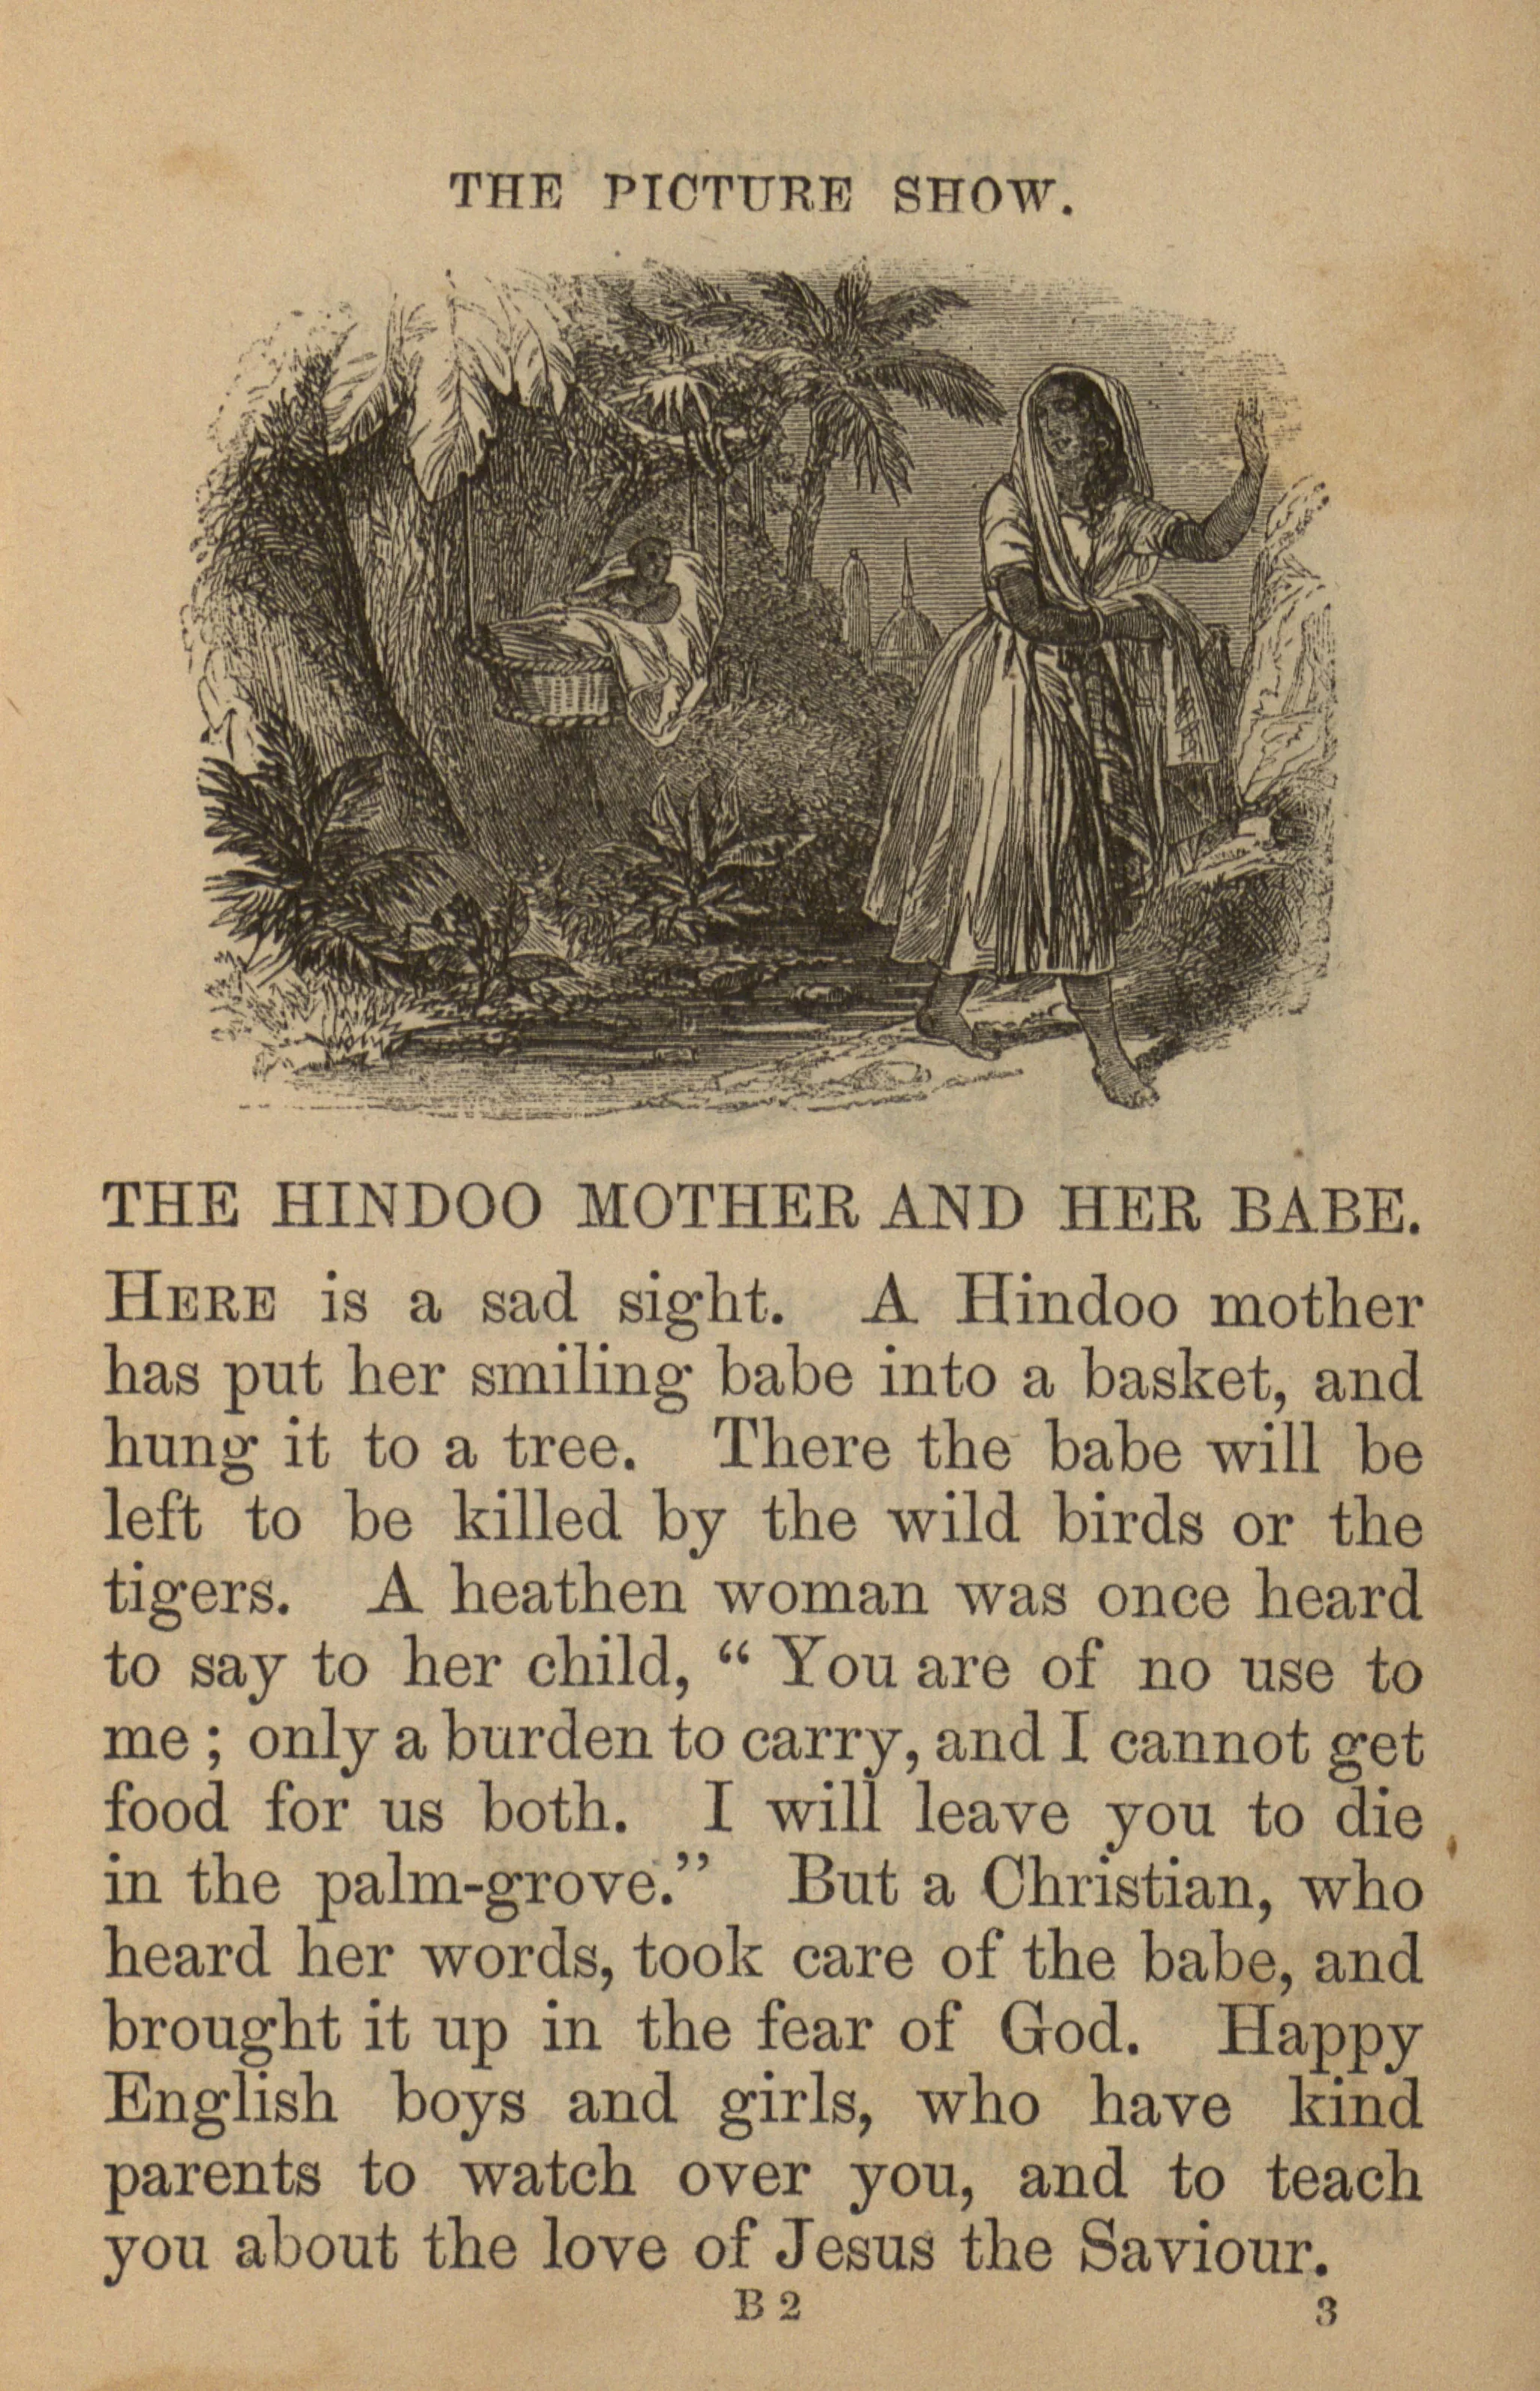 A page of text depicting an Indian woman and her baby